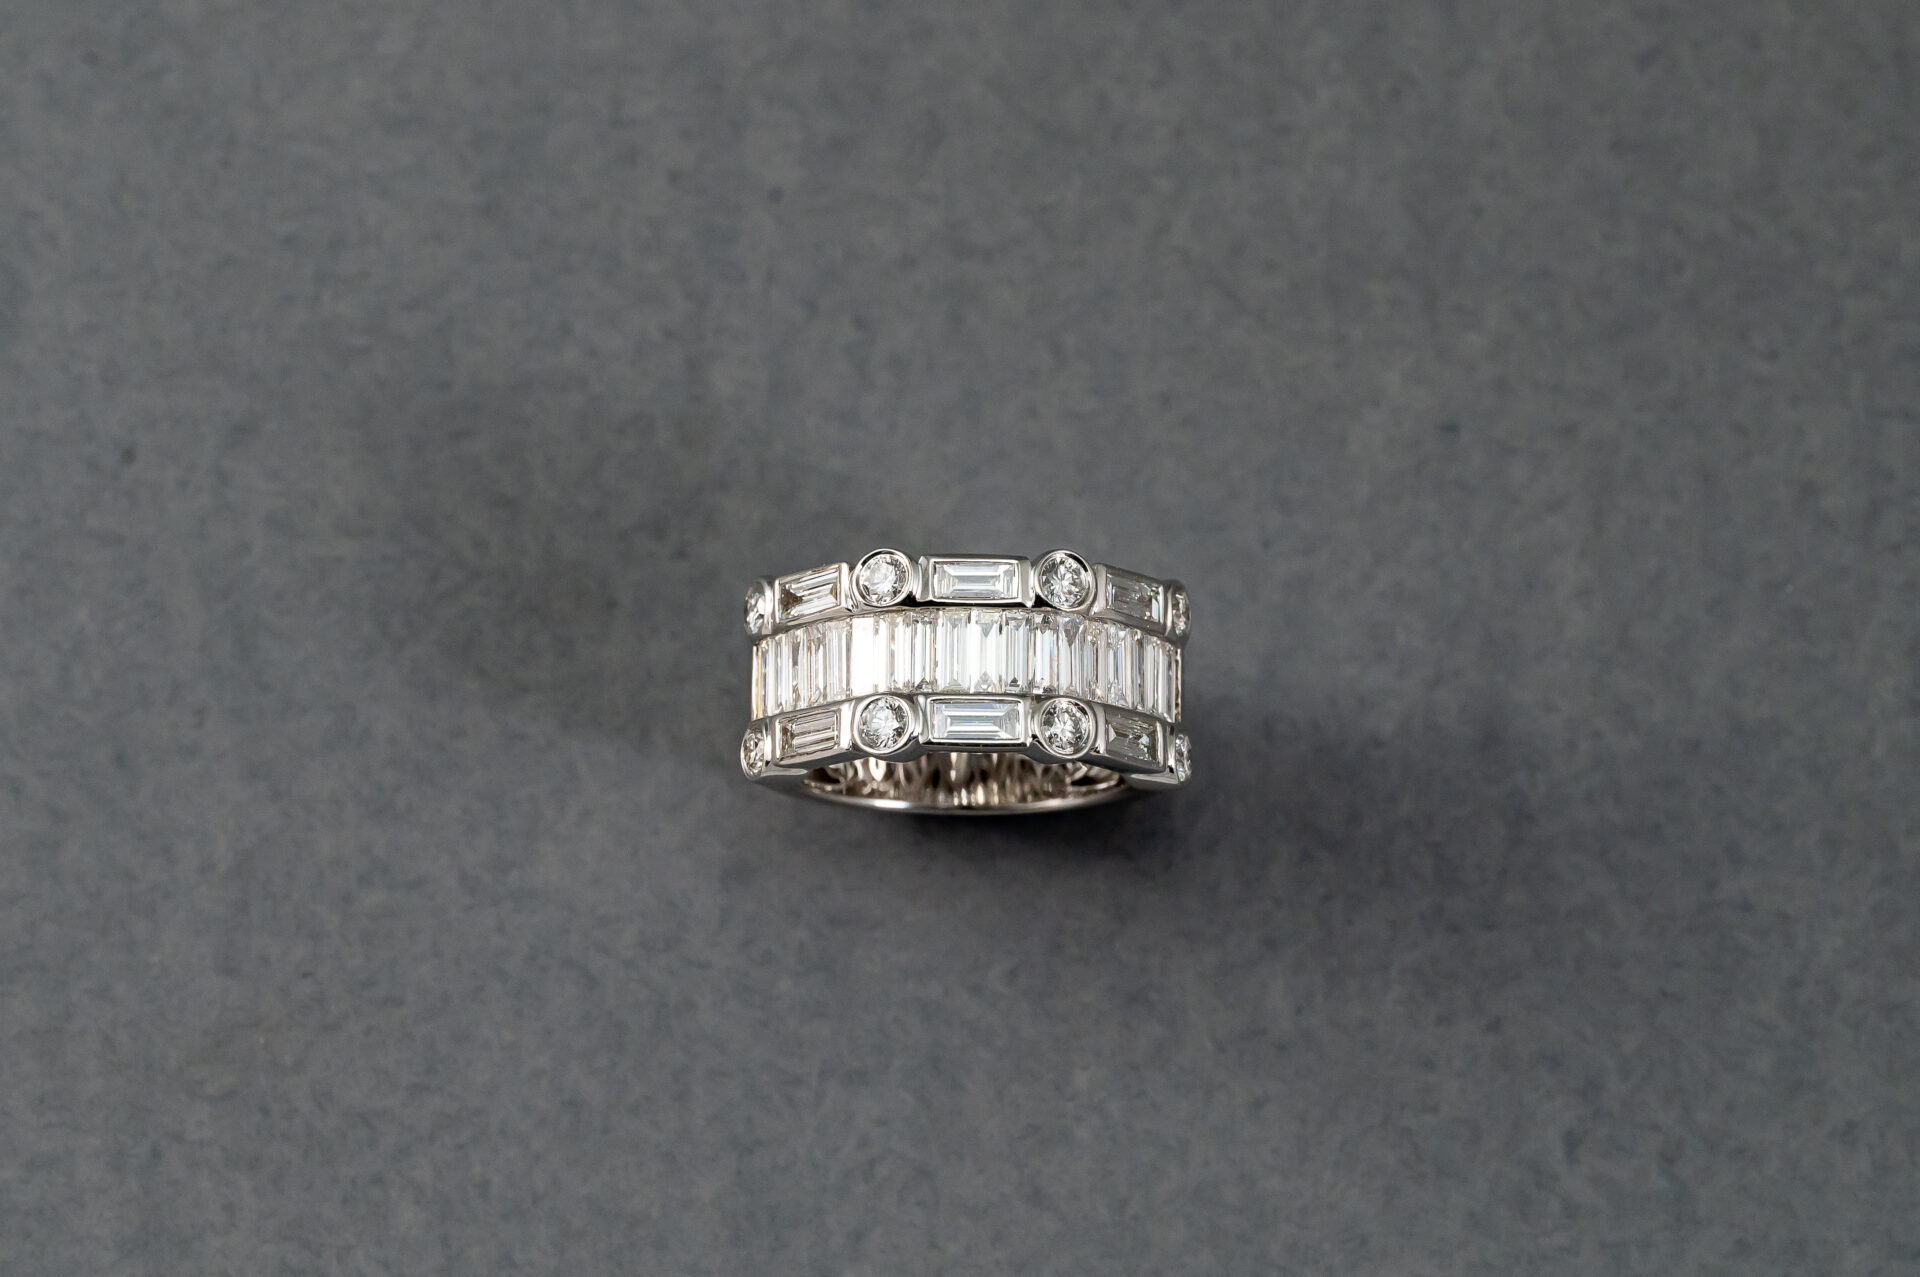 A silver ring with many small diamonds on it